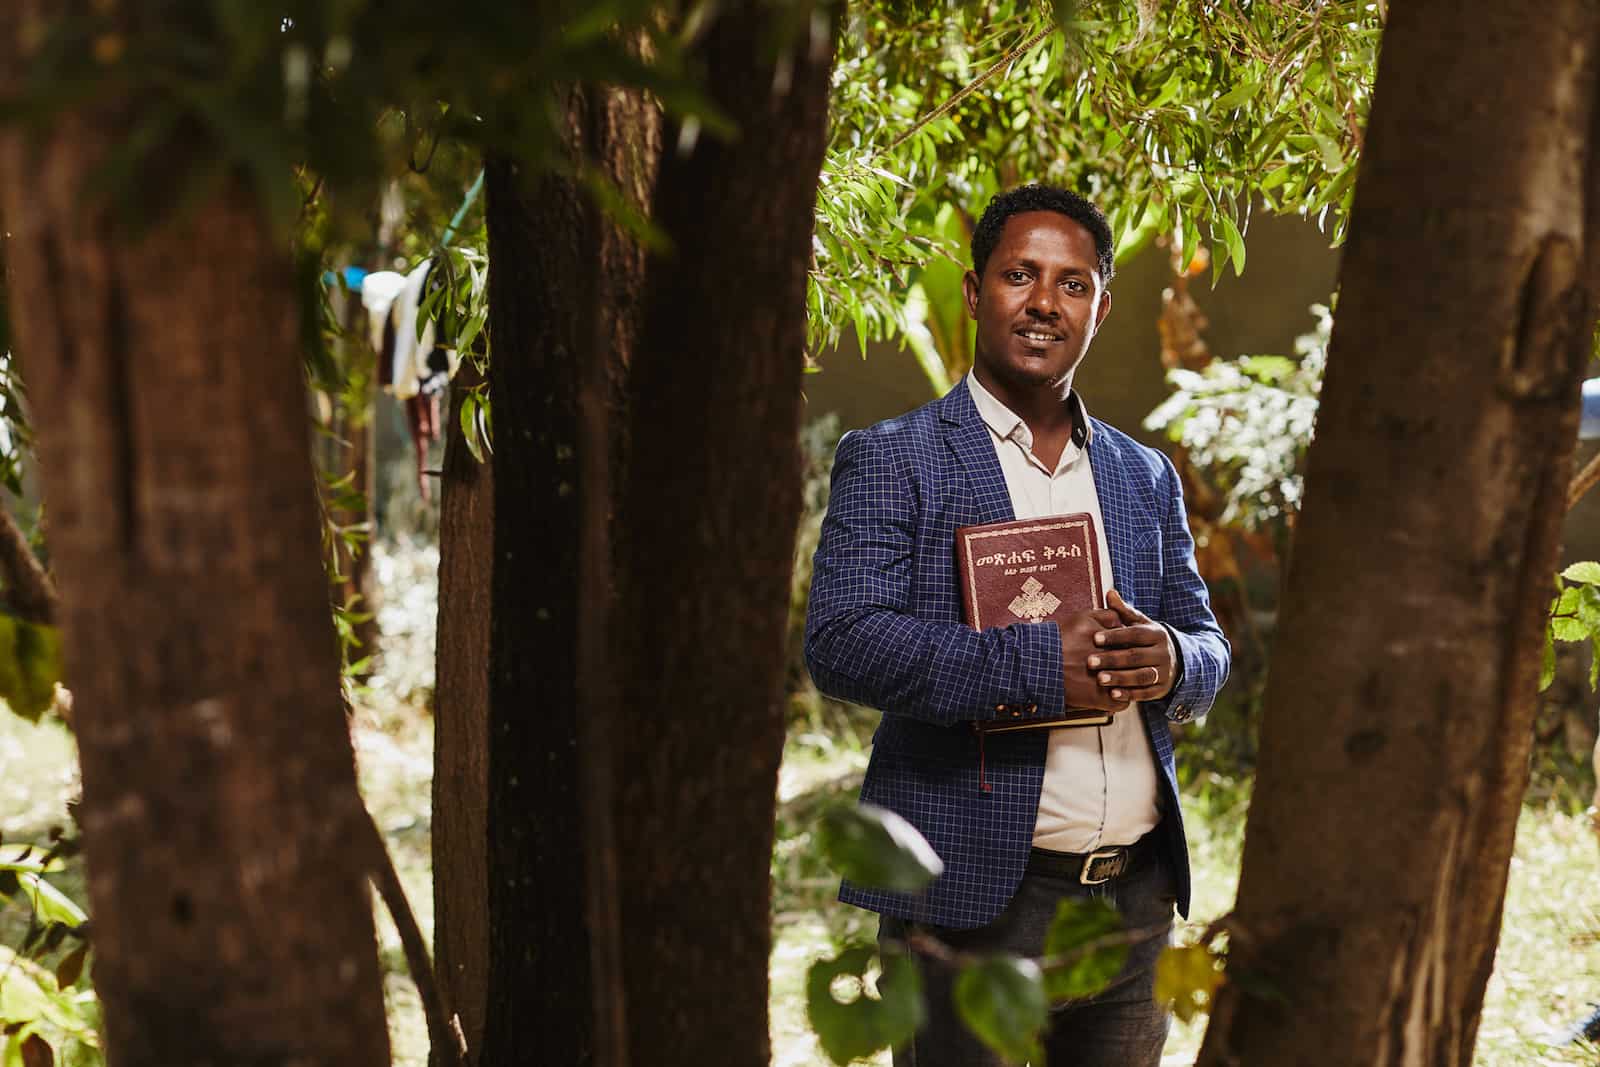 A man stands in a group of trees wearing a suit, holding a Bible and smiling into the camera.